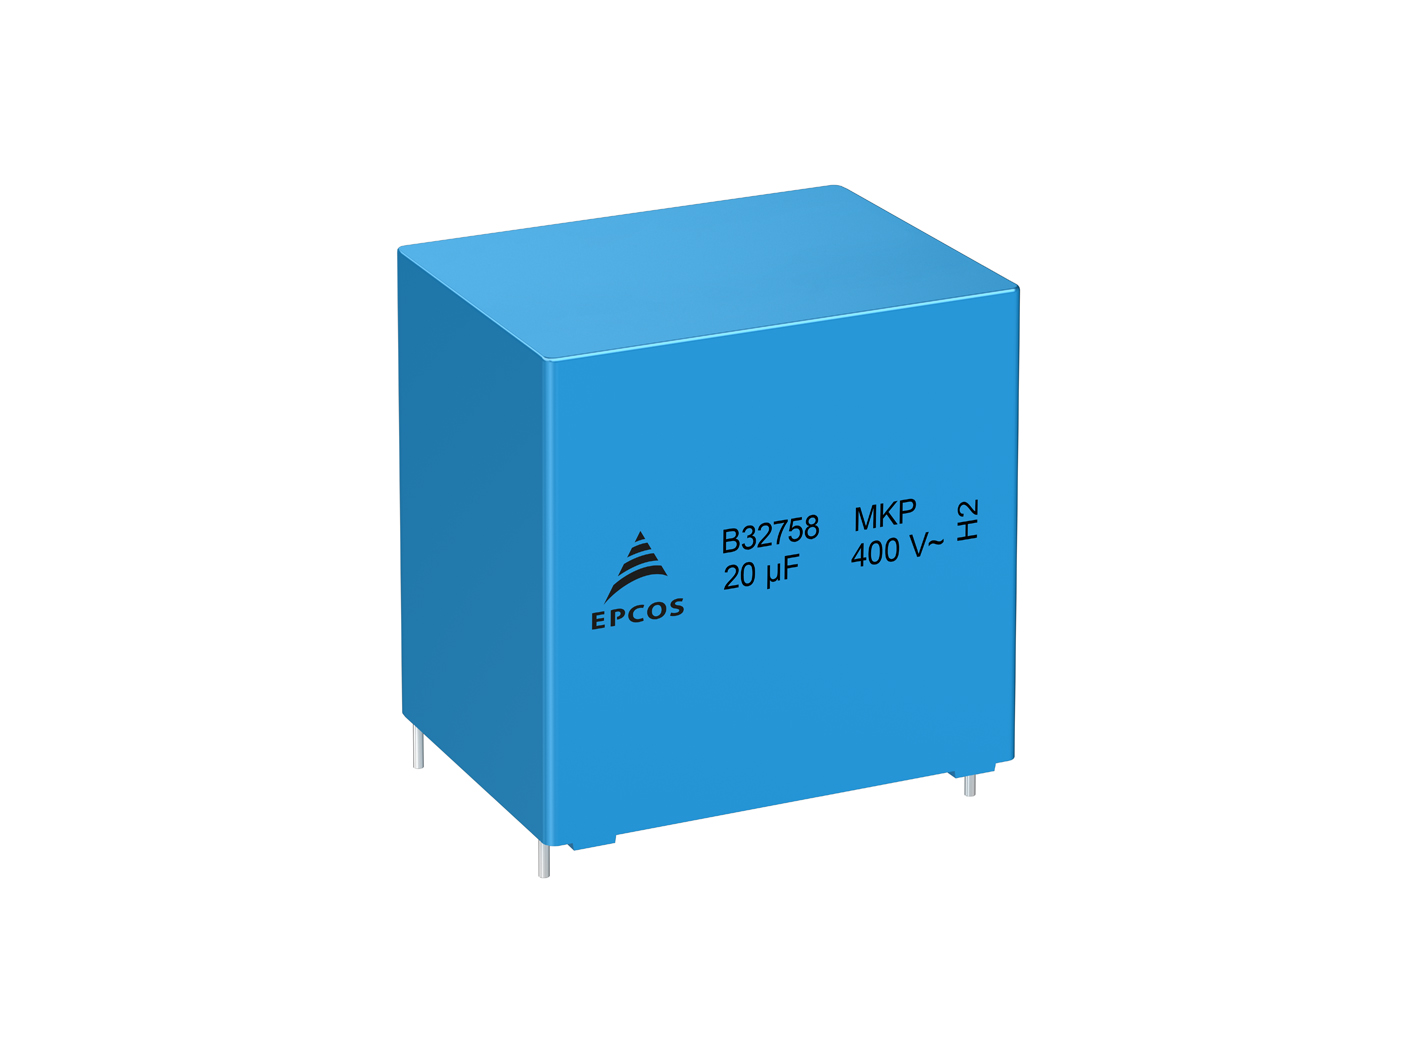 TDK has updated its EPCOS B32754 to B32758 series ac filter capacitors 